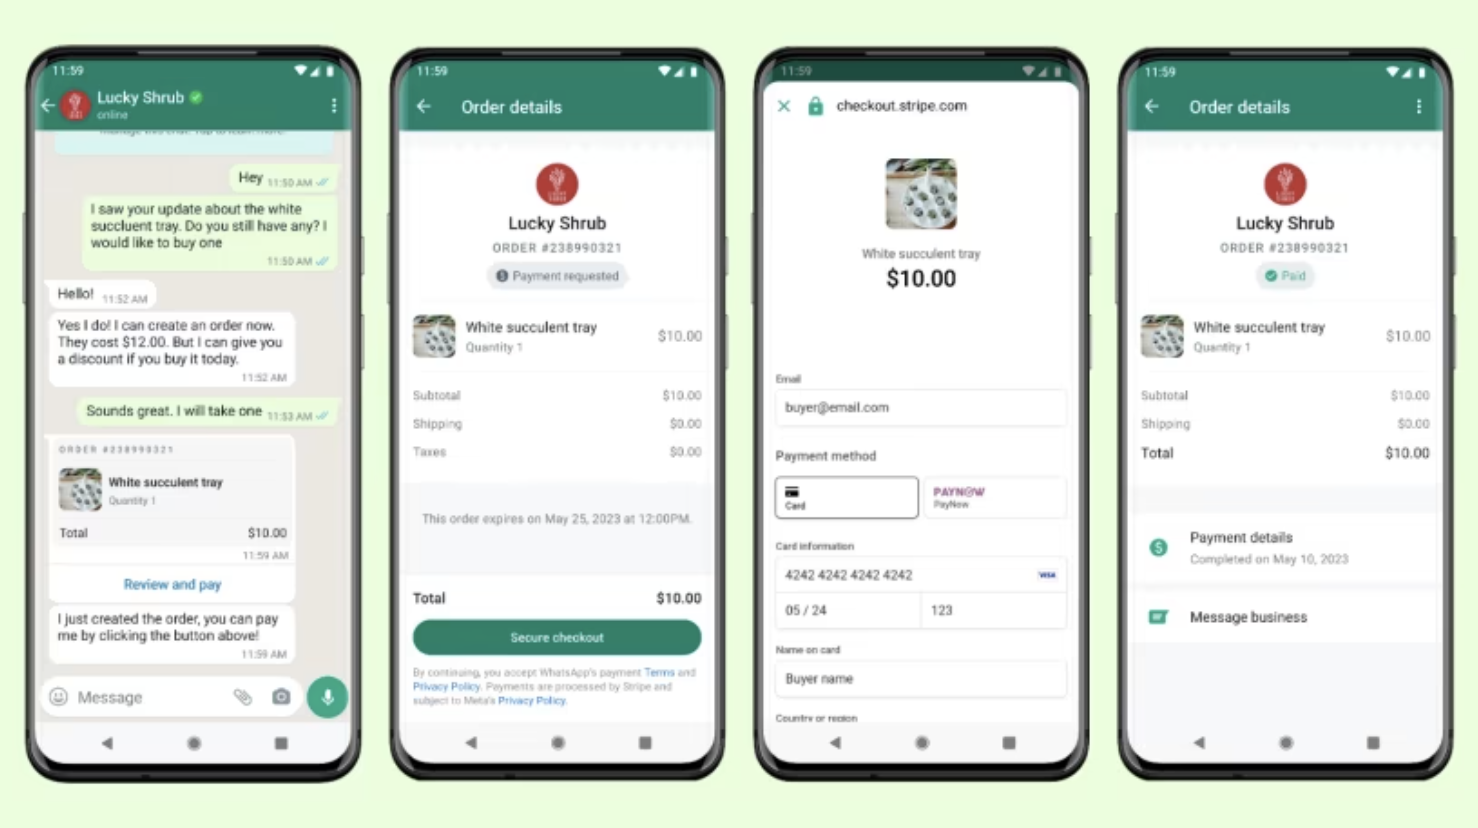 WhatsApp In-App Payment Is Now Available At Selected Local Businesses